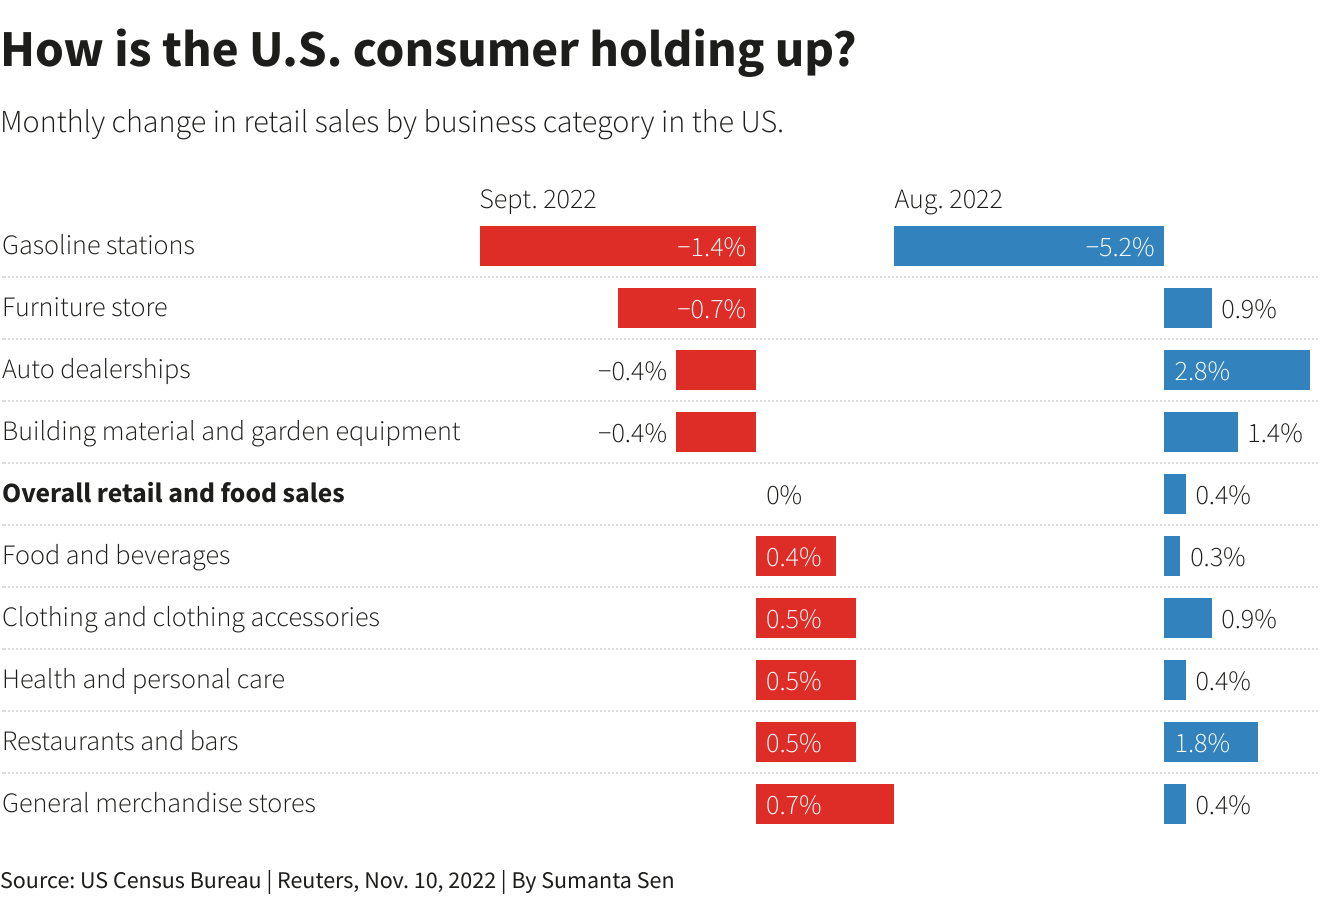 Retail sales in the US